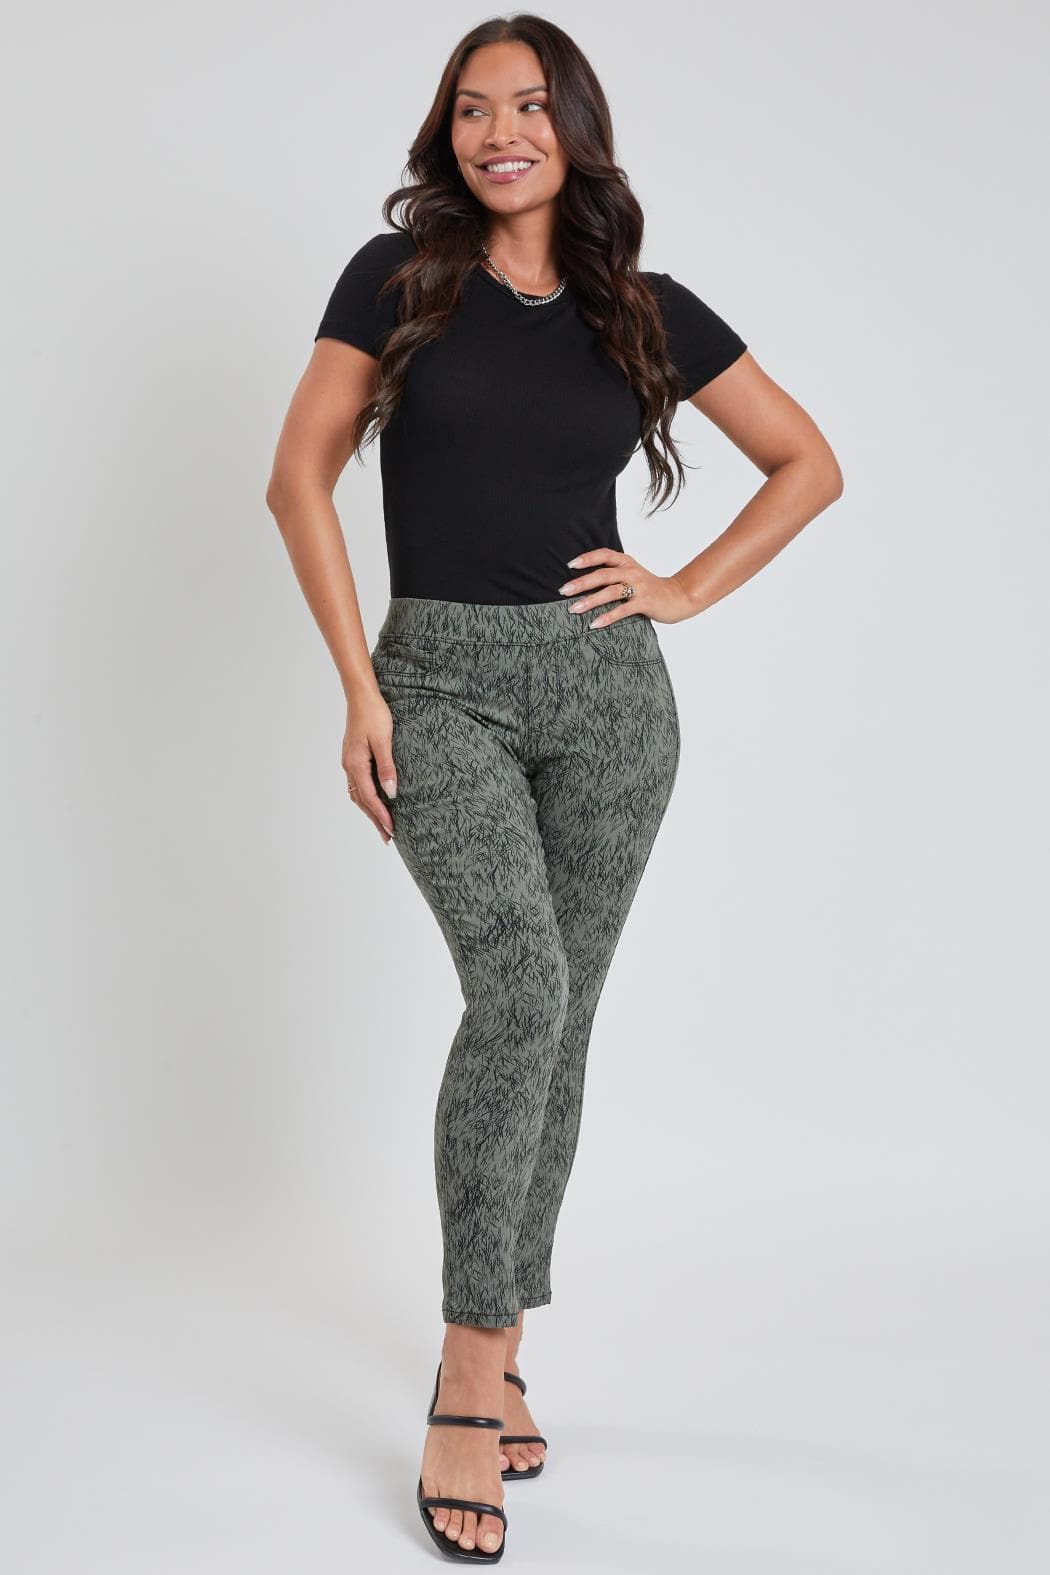 Women's Petite Mid Rise Jeggings from ROYALTY – Royalty For me